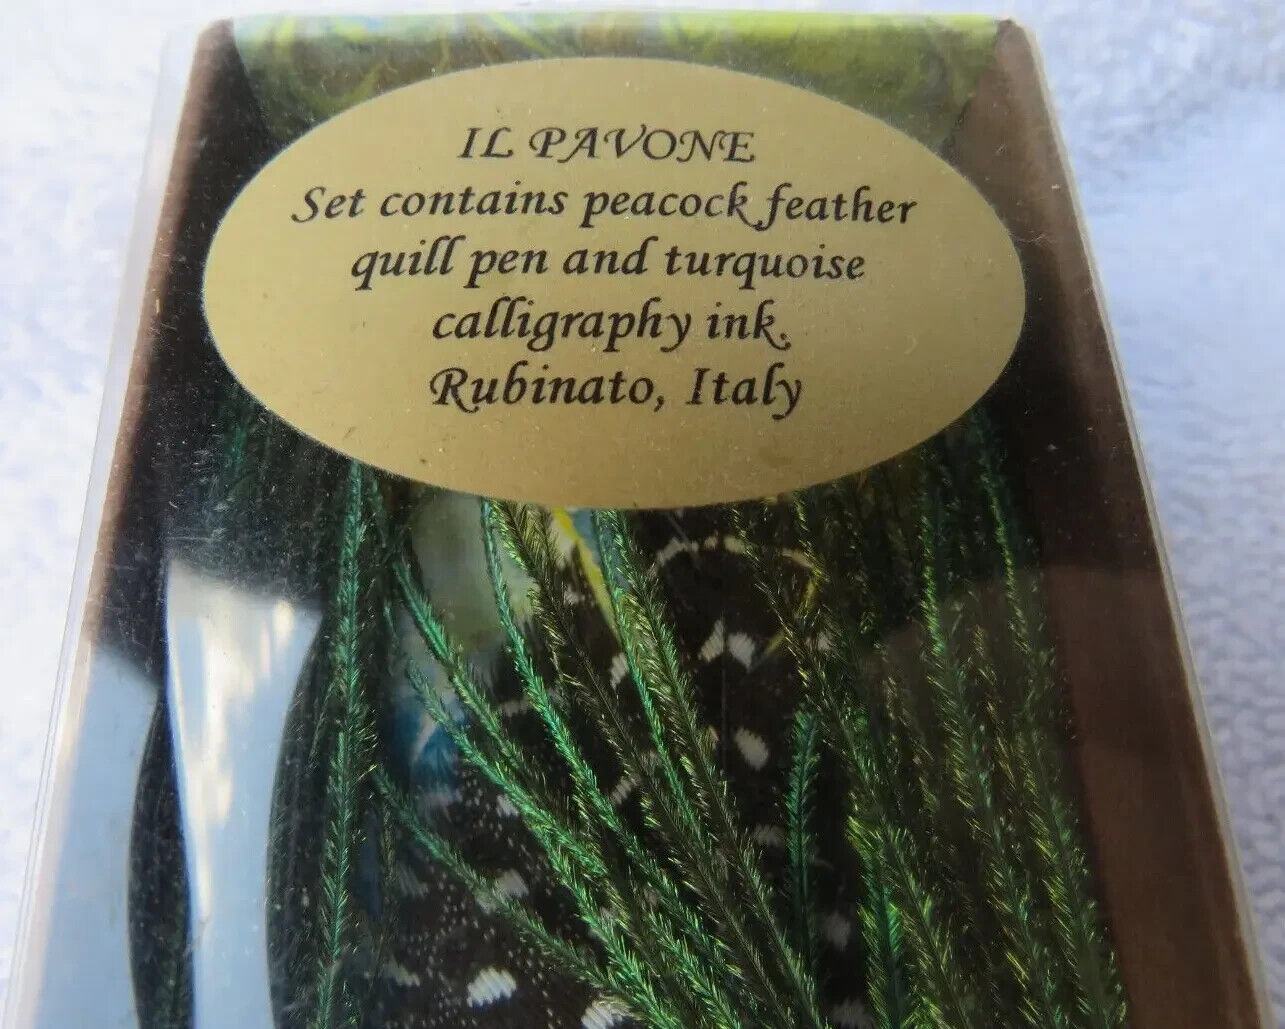 New Peacock Feather Quill Pen and Turquoise Ink Set From Italy